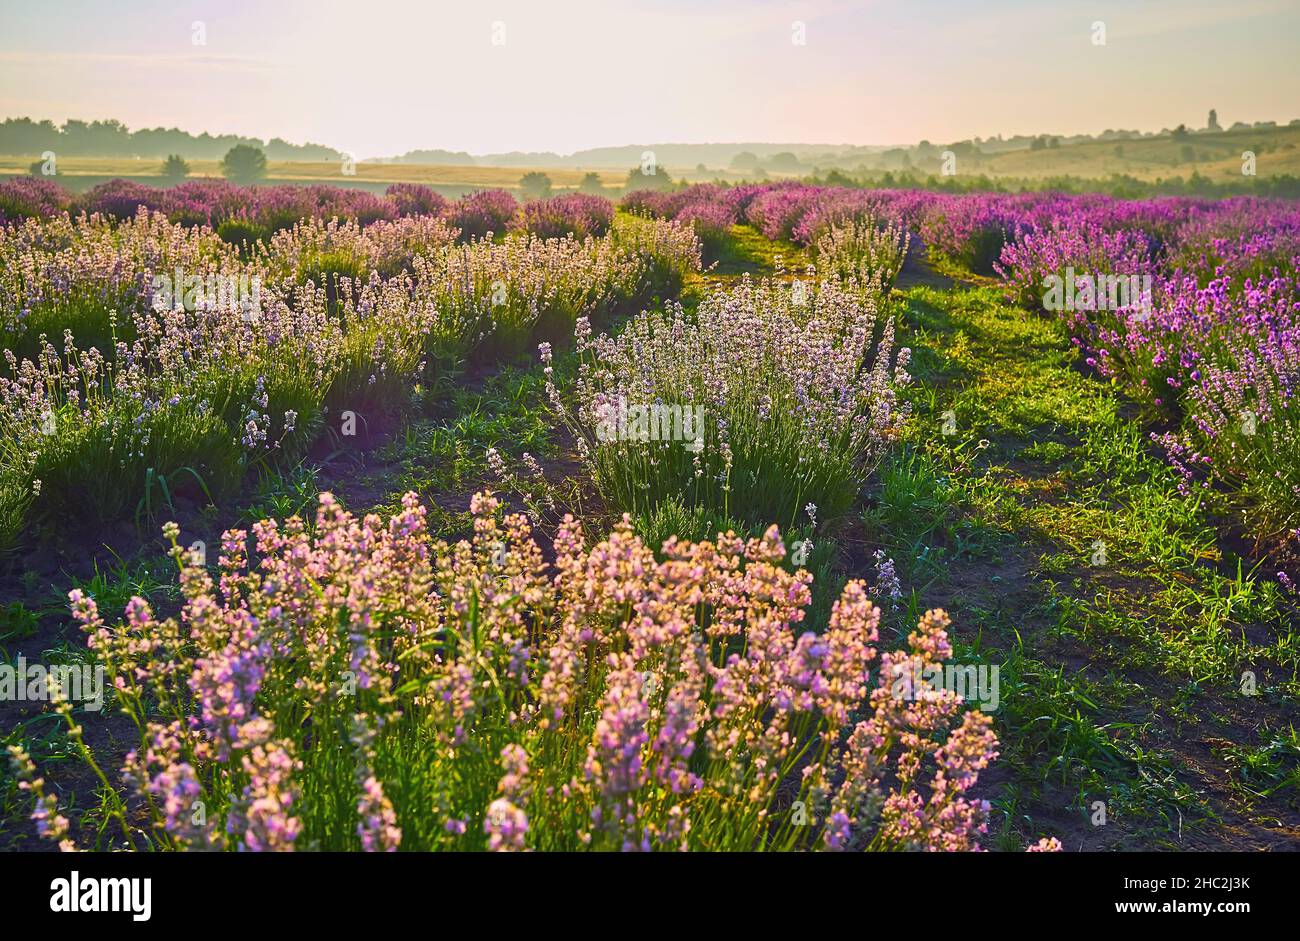 The blooming lavender field with white and purple plants in morning haze Stock Photo